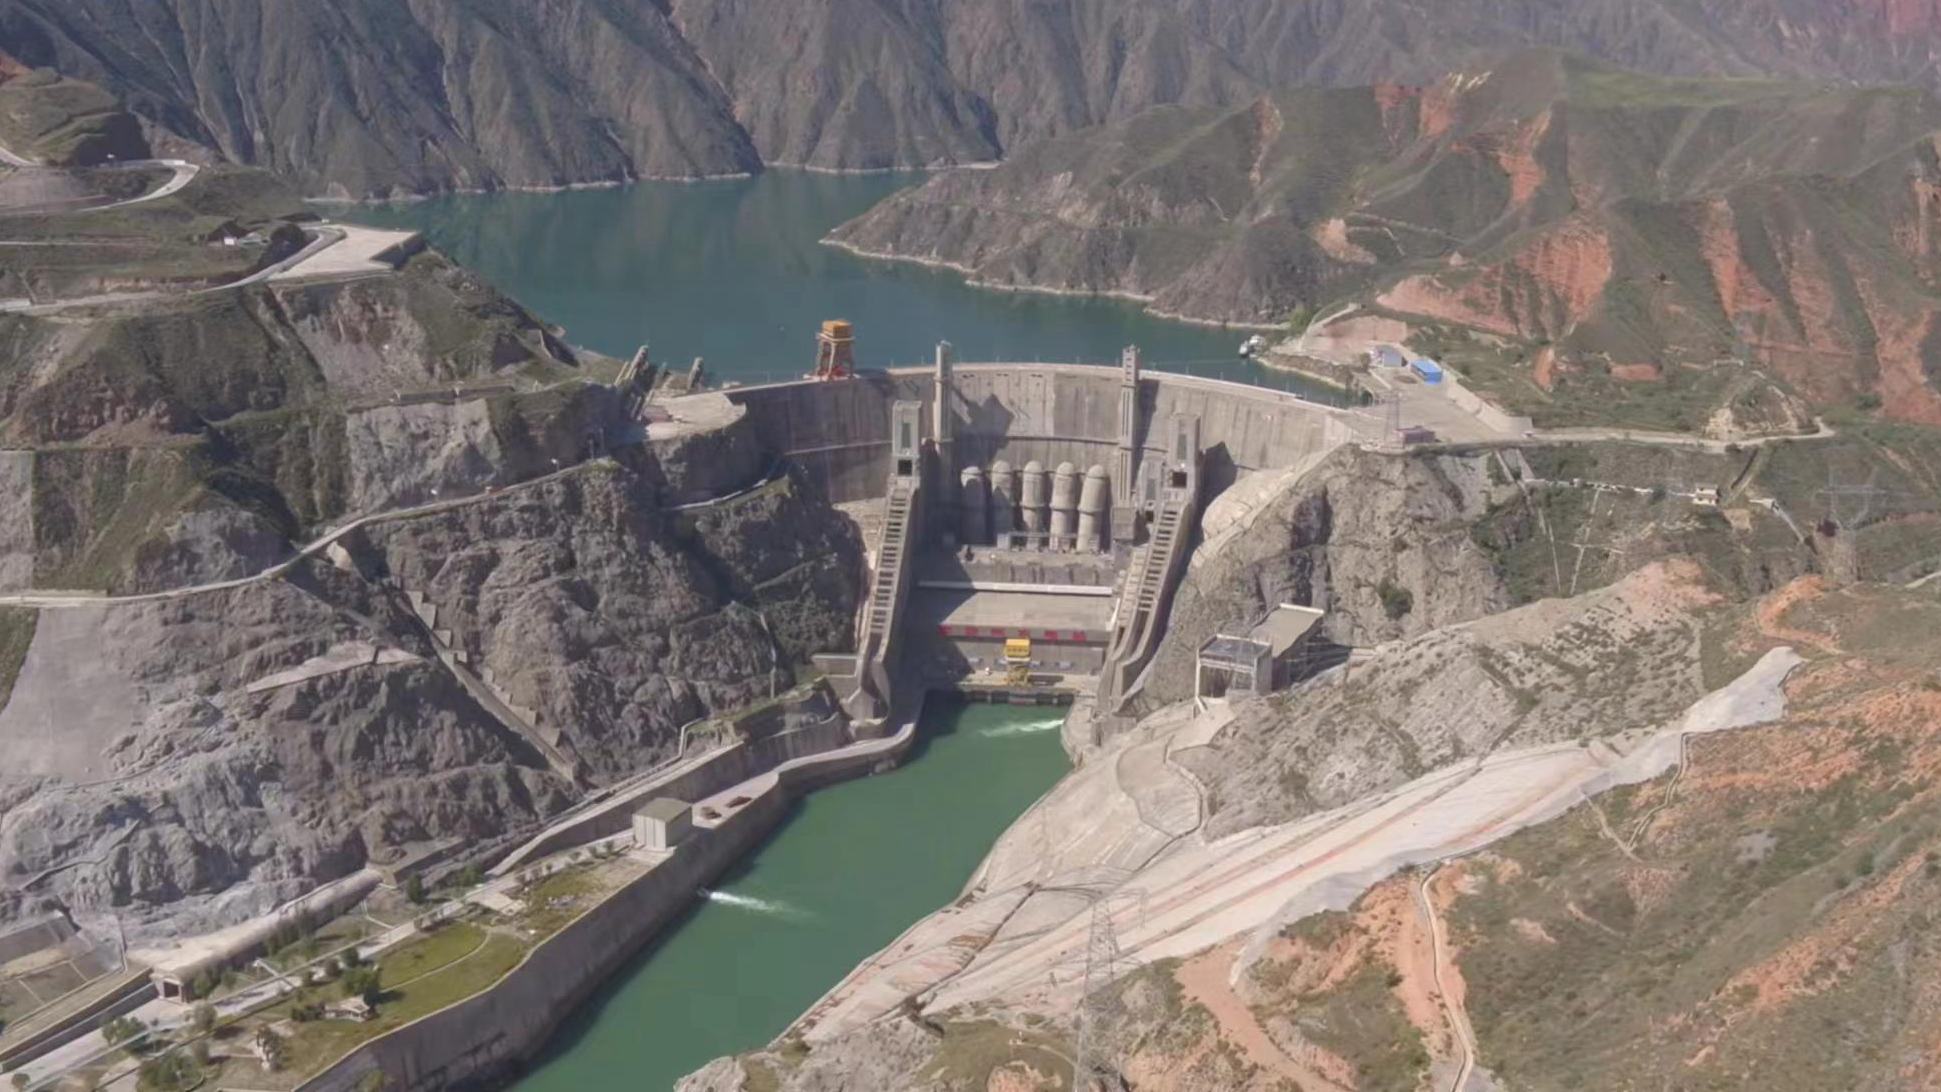 An aerial view of the Lijiaxia Hydropower Station at the border of Jainca County and Hualong County in northwest China's Qinghai Province. 